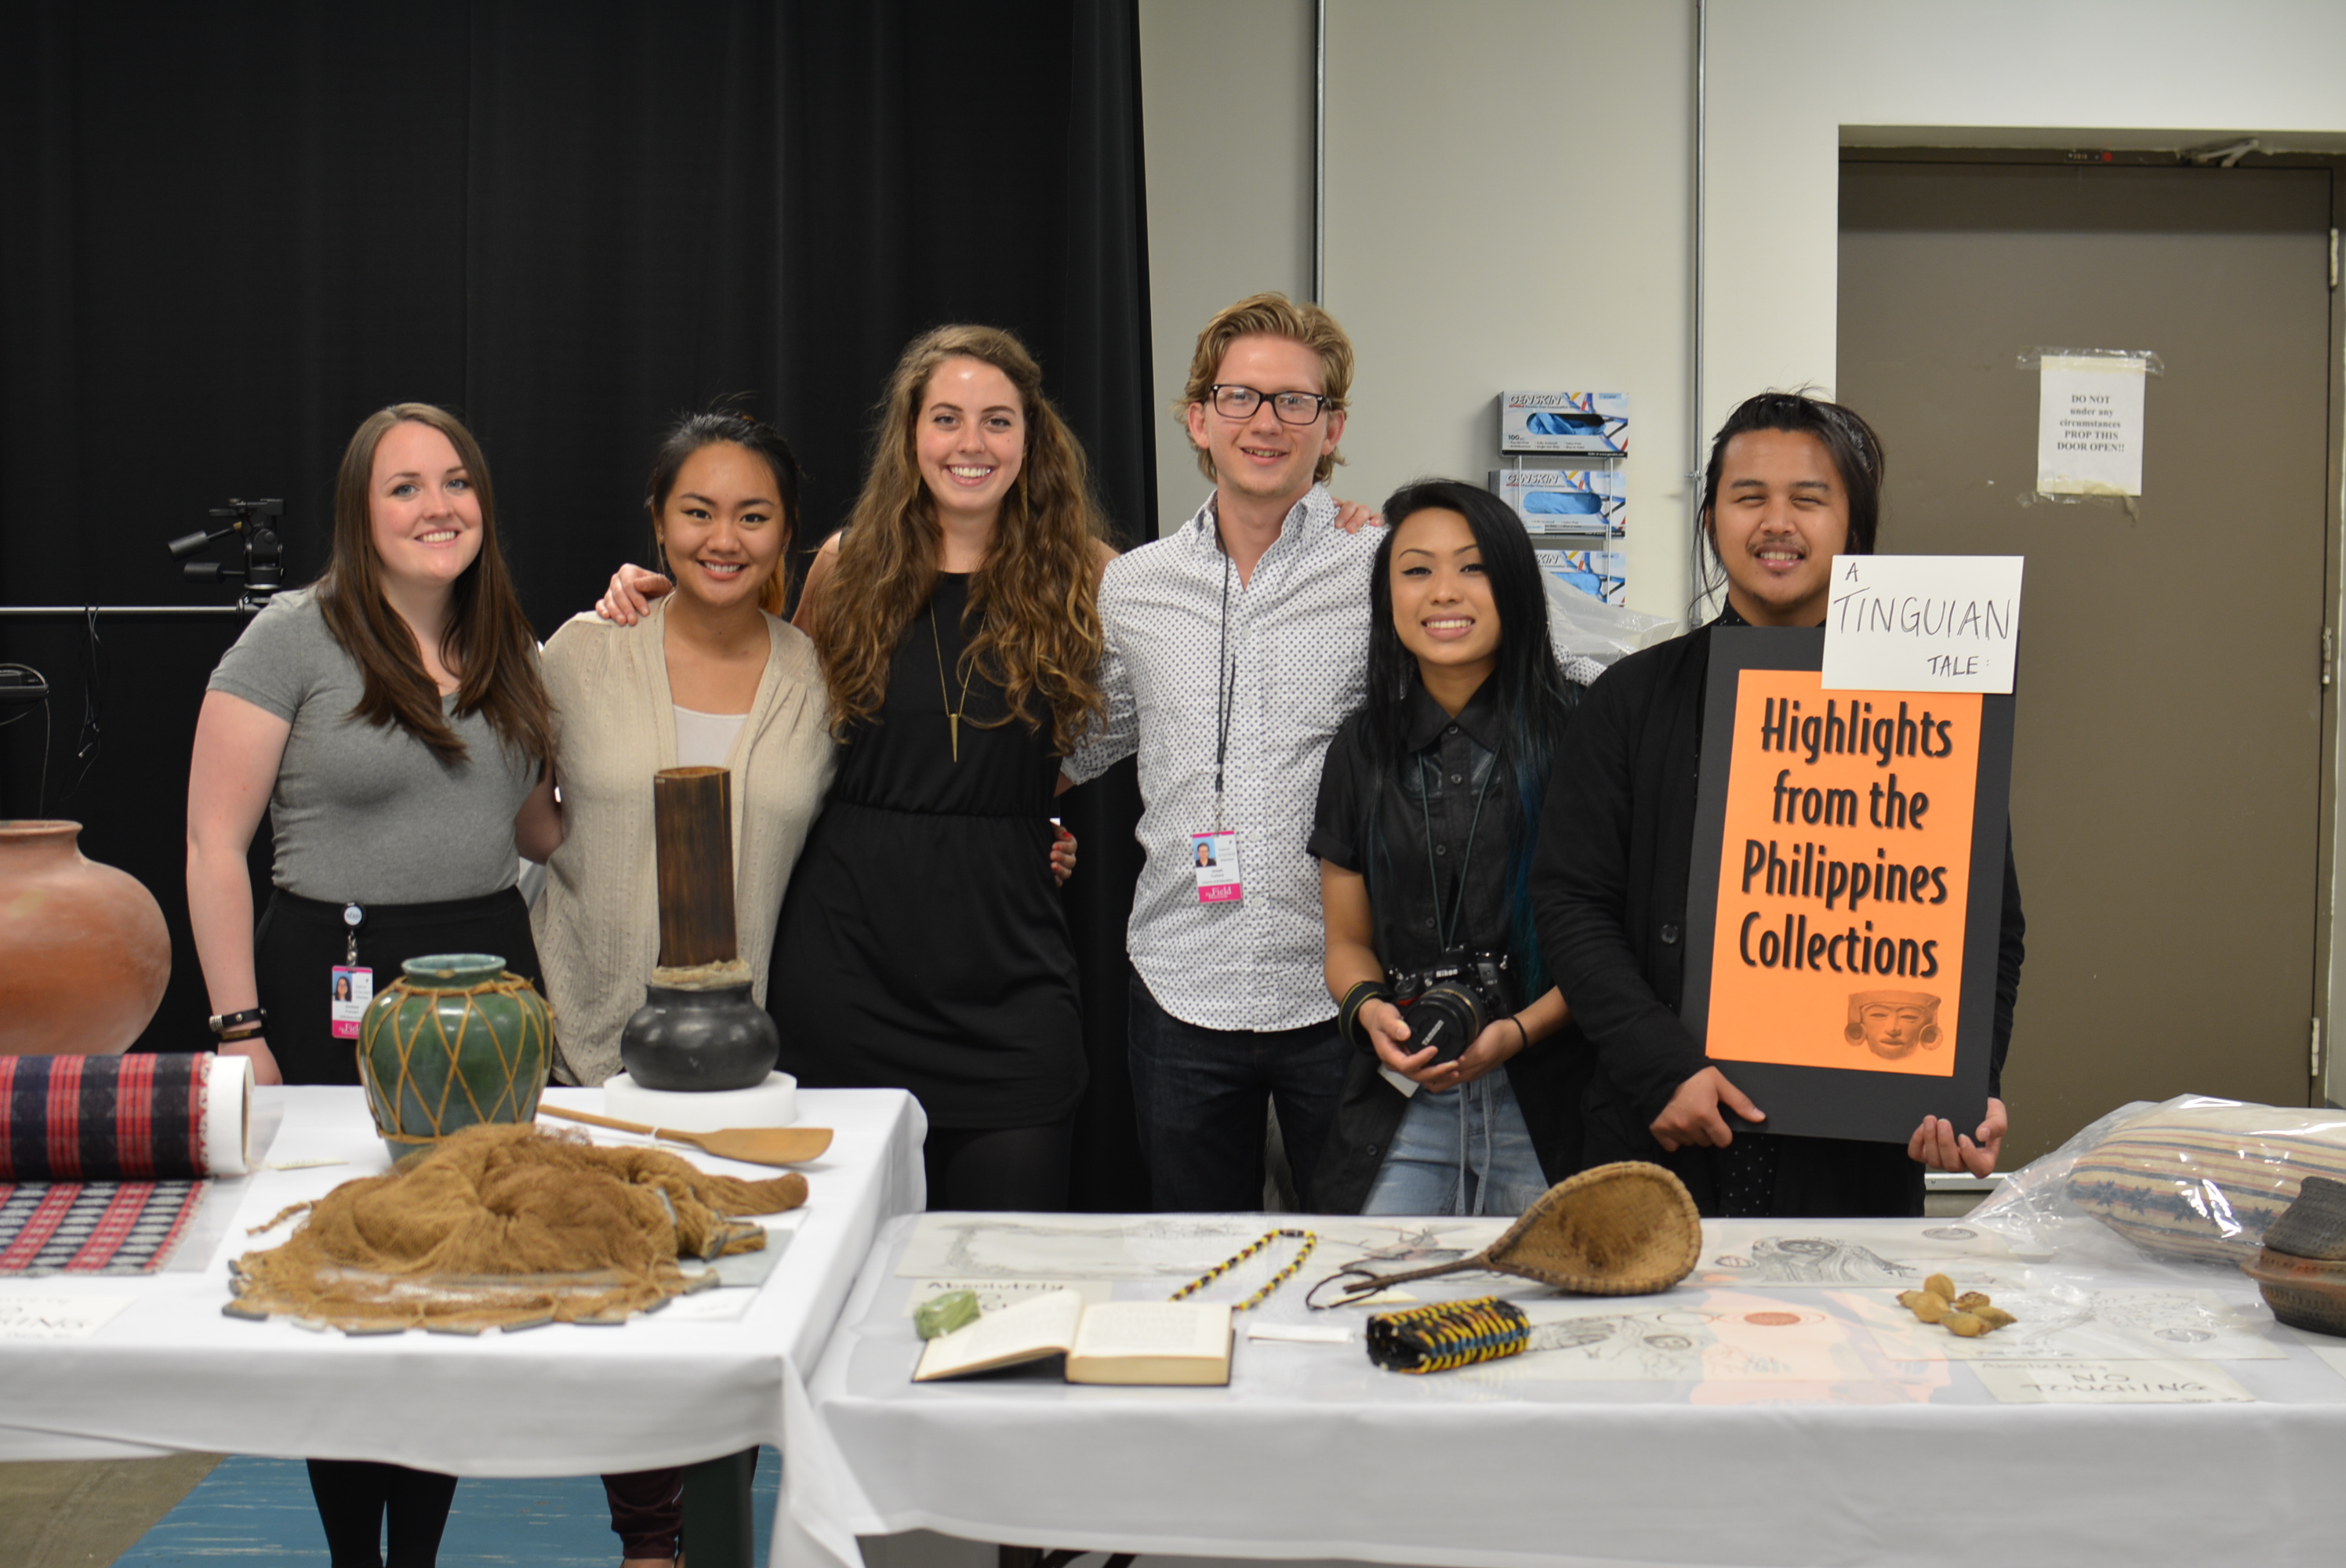 The Digital Co-Curation Team poses for a group photo behind their display tables. (c) Field Museum of Natural History - CC BY-NC 4.0